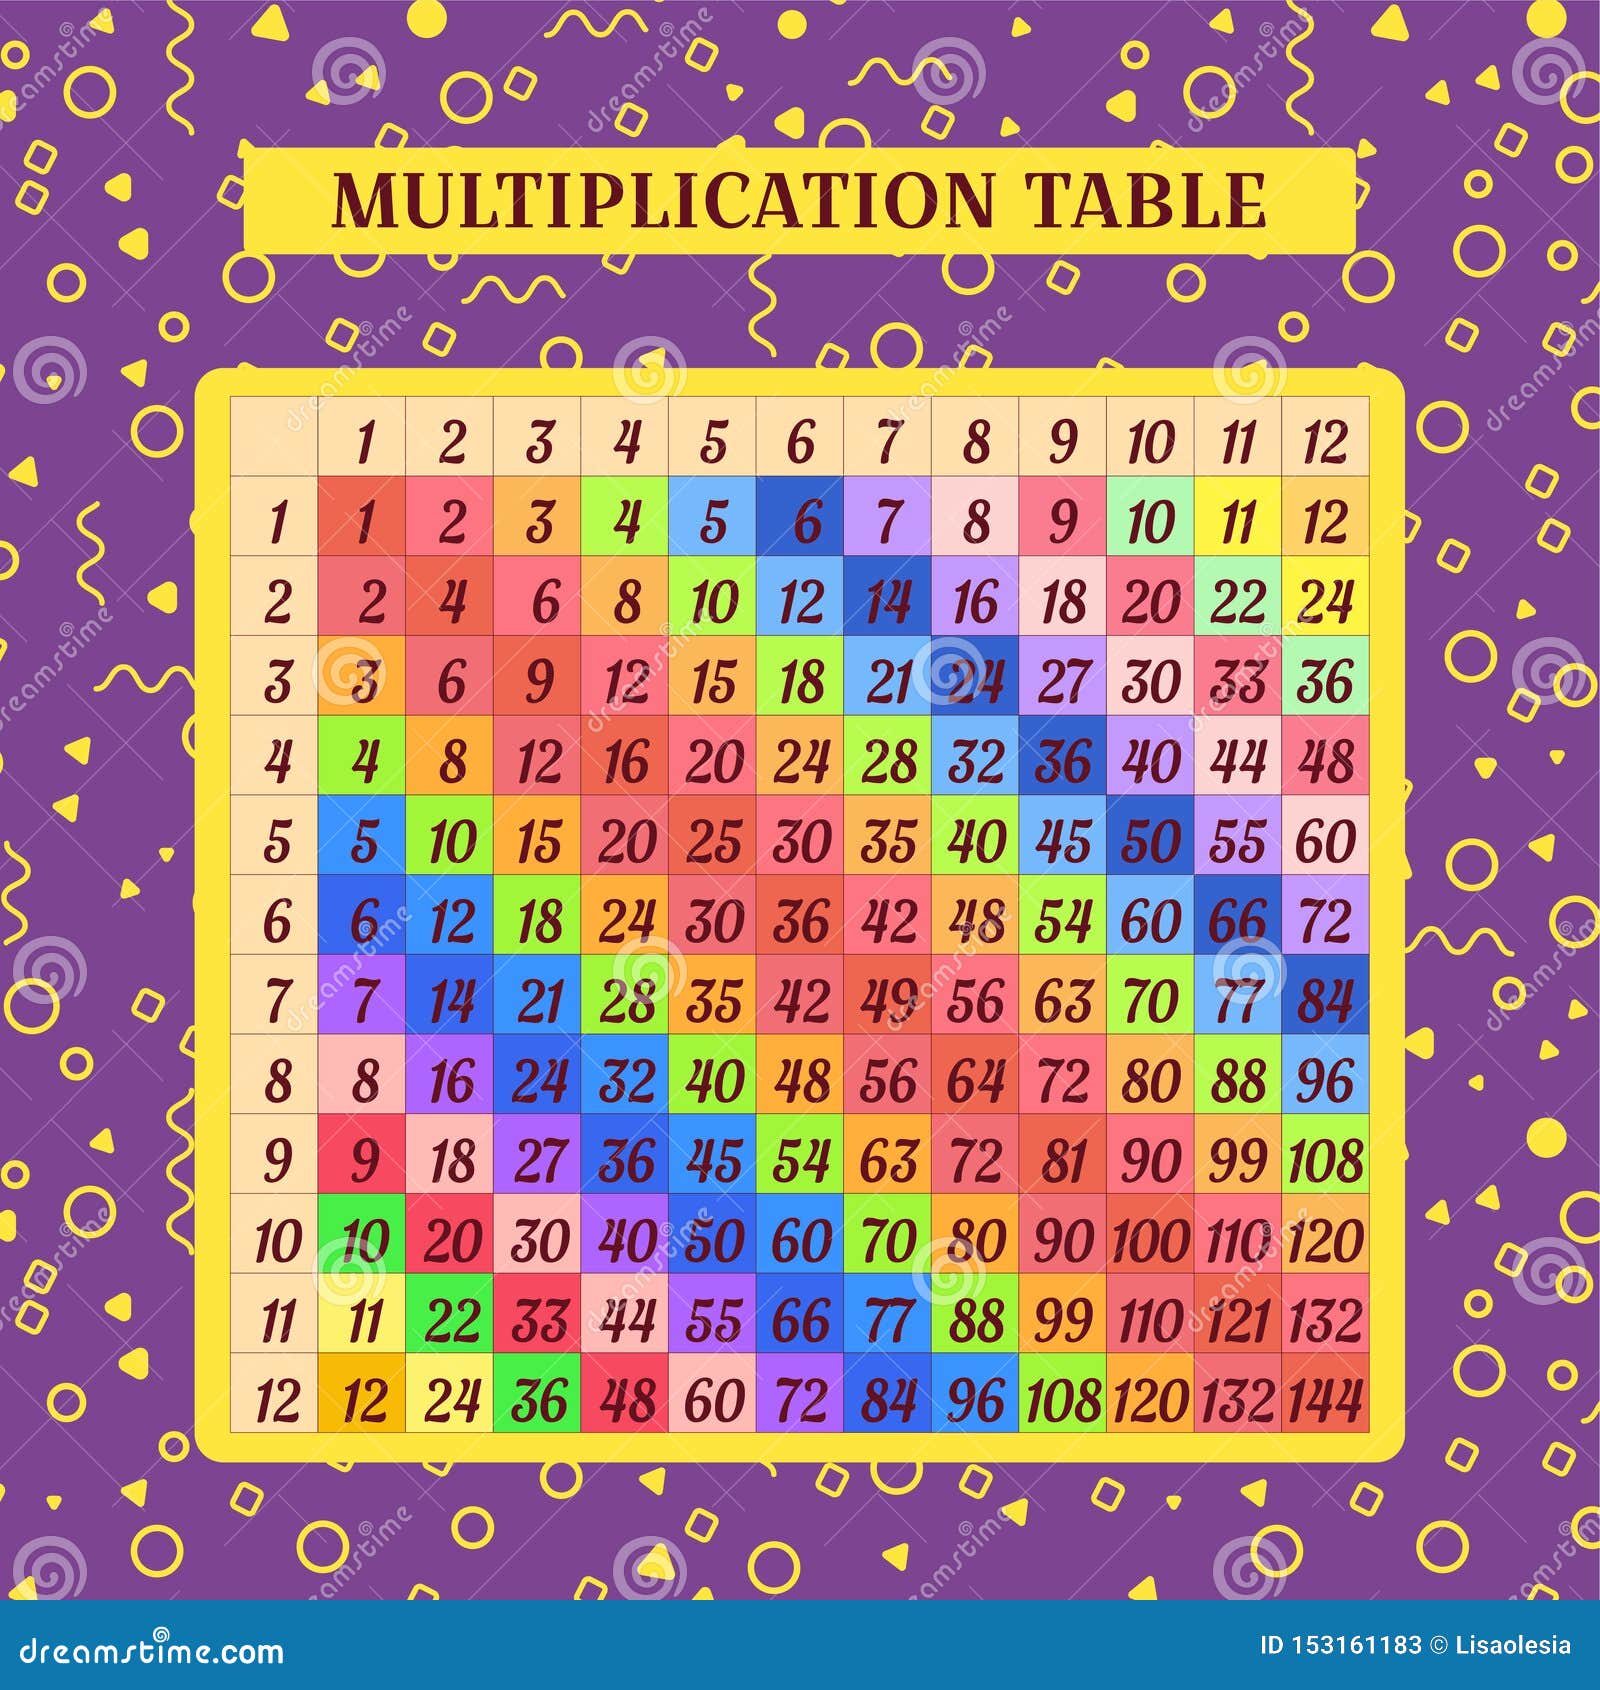 multiplication table card red & green polka dots 